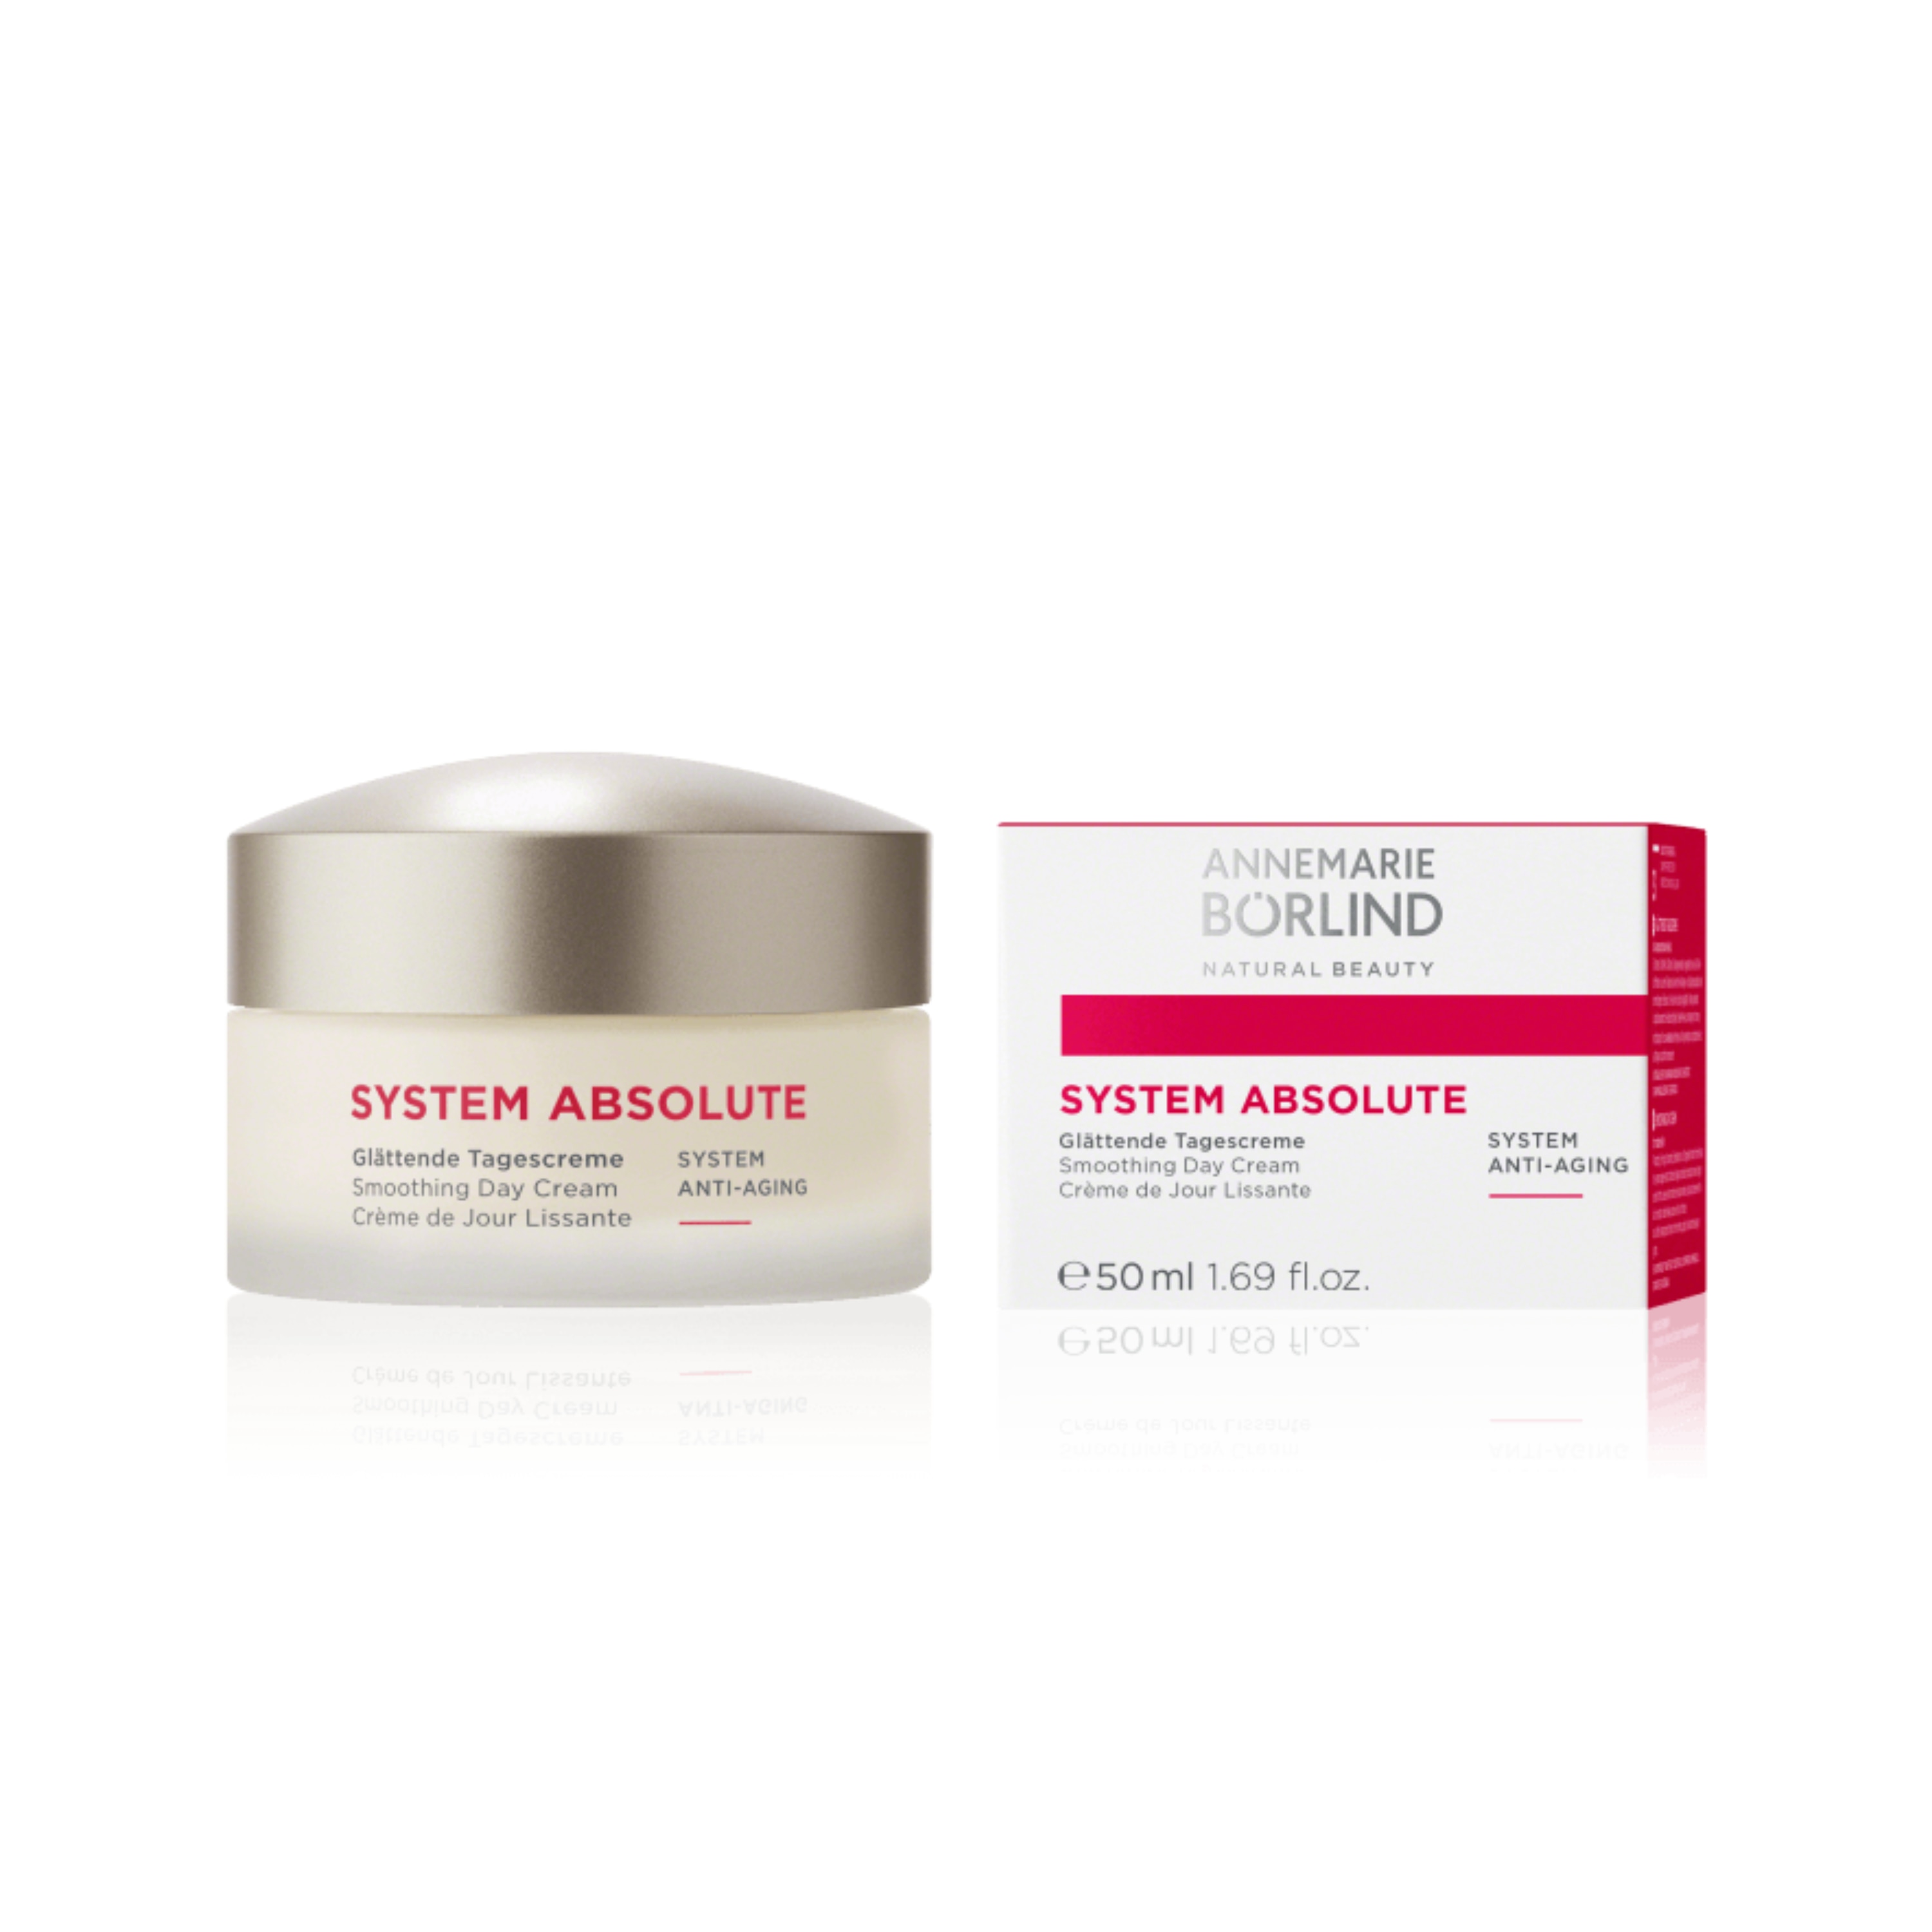 System Absolute Day Cream 50ml